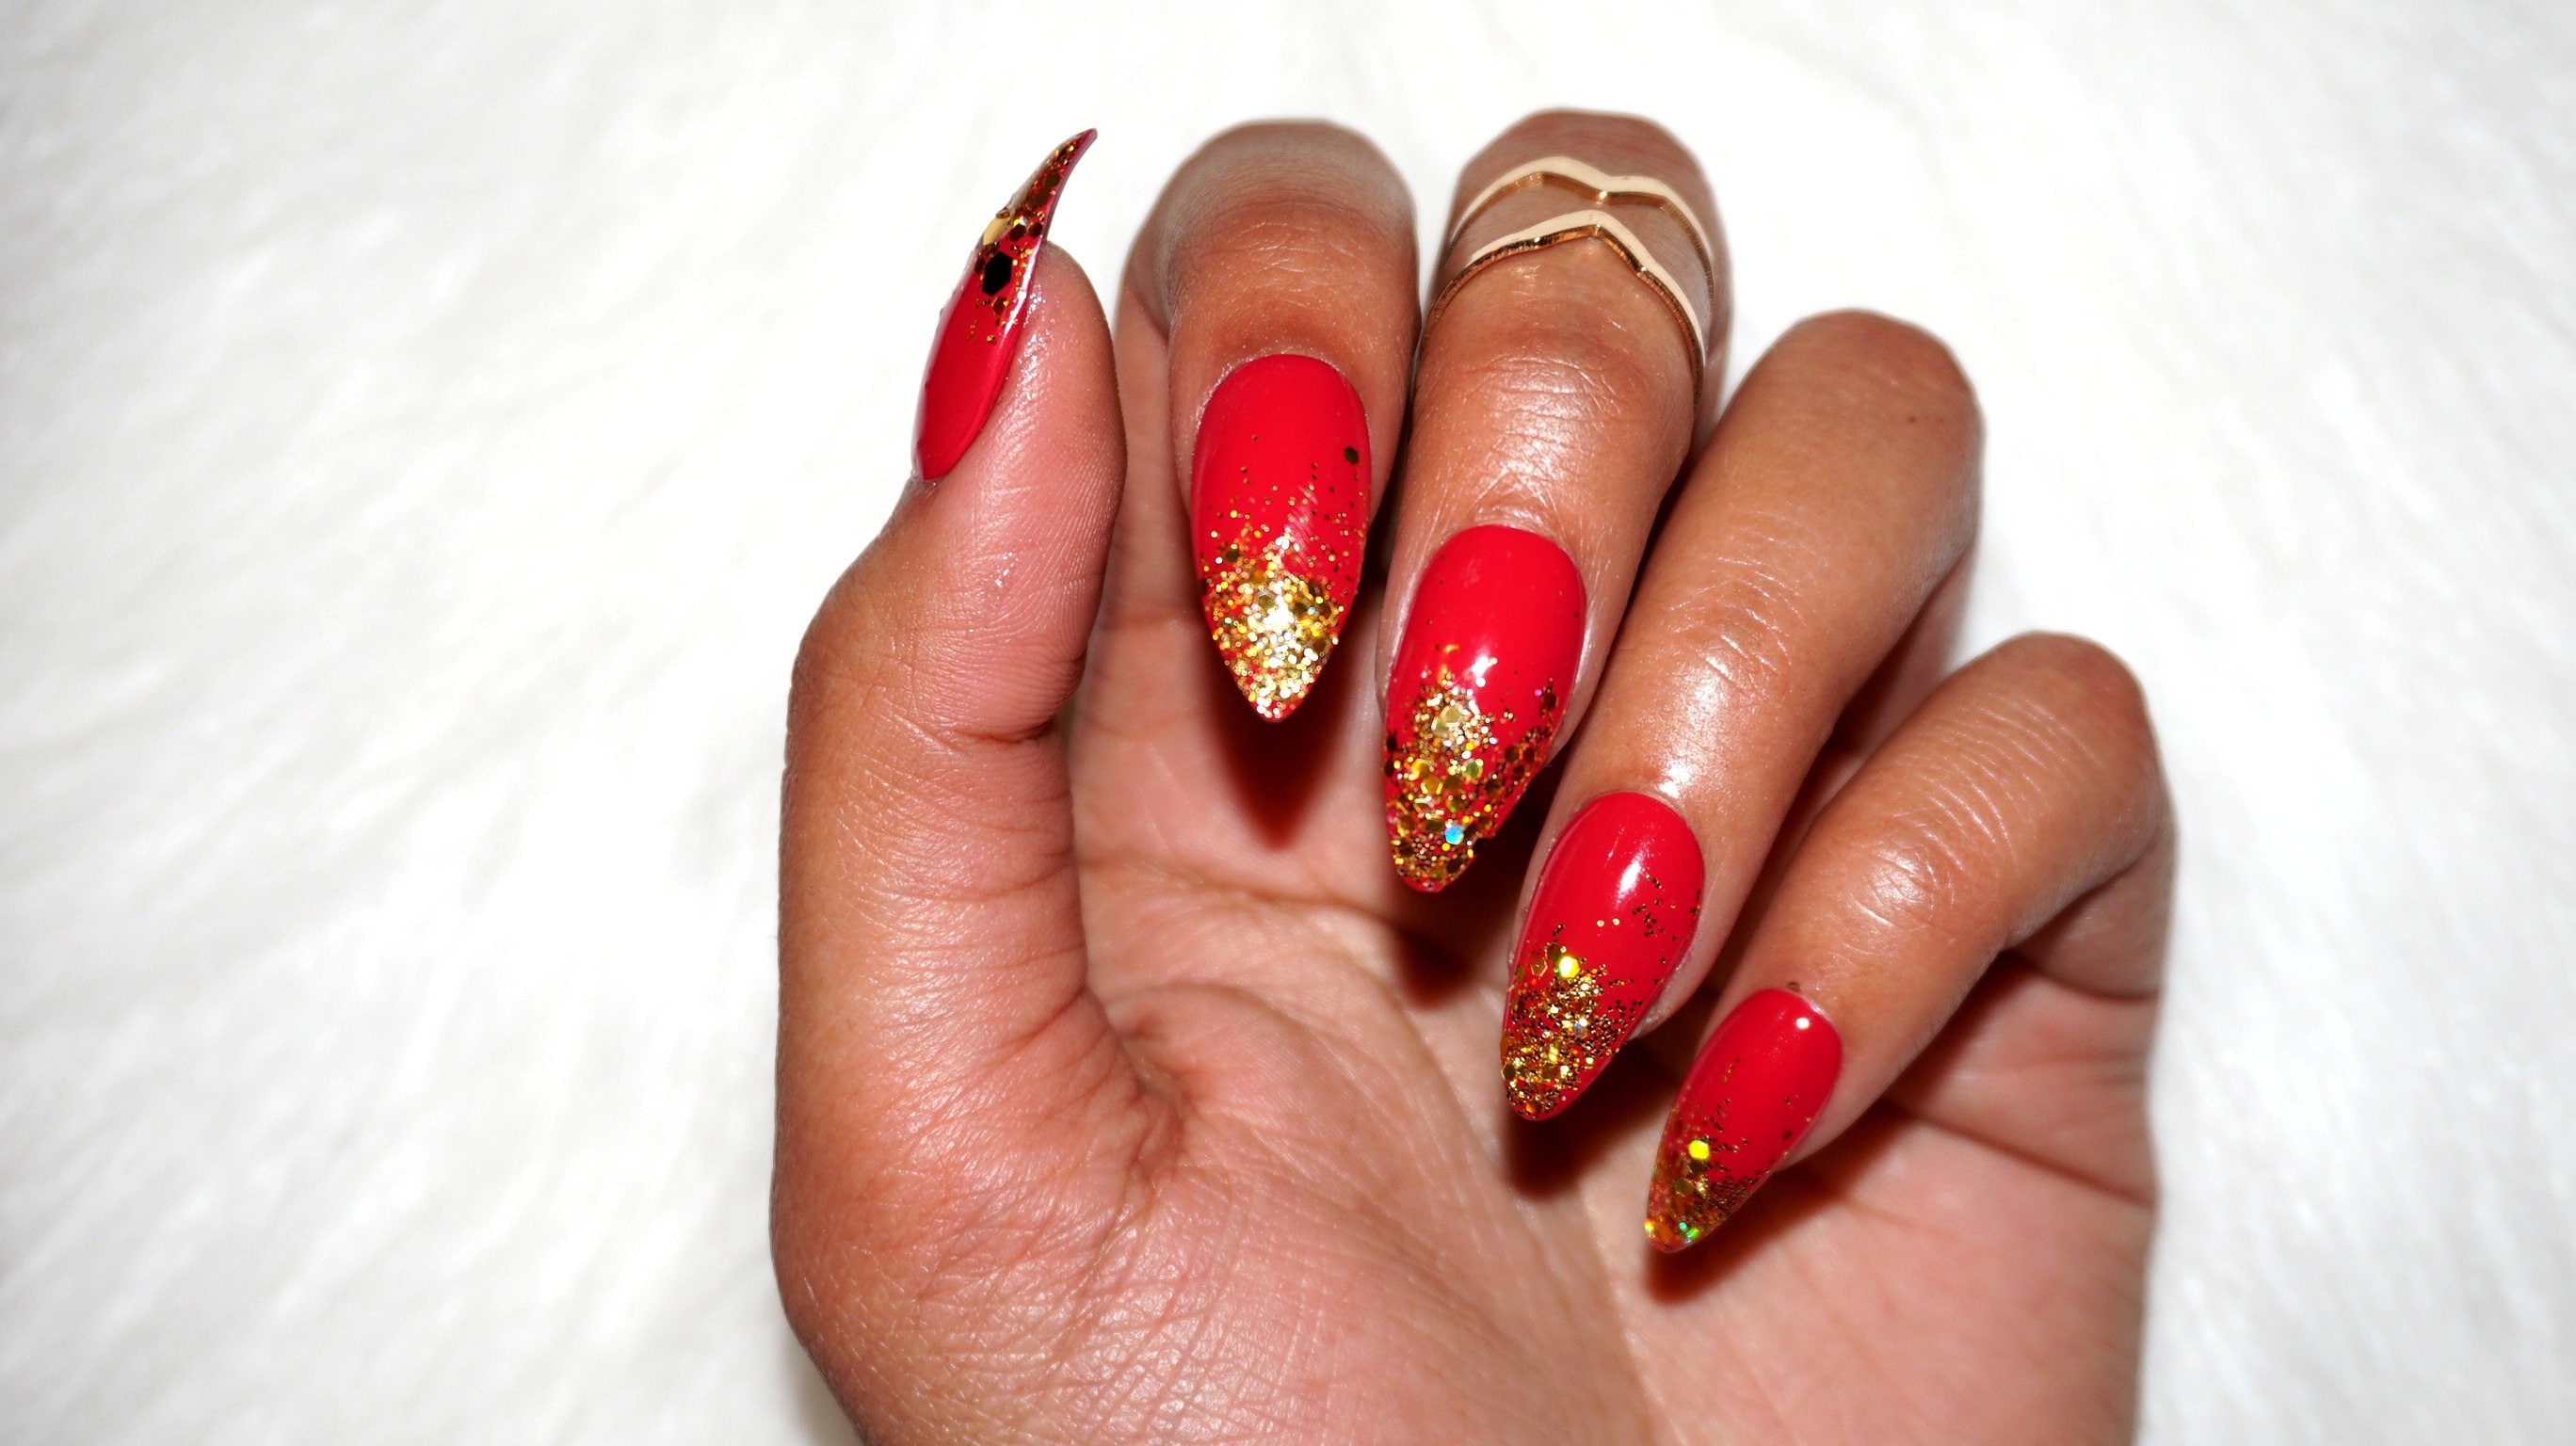 Acrylic nails with gold, green and red glitter nails | Flickr